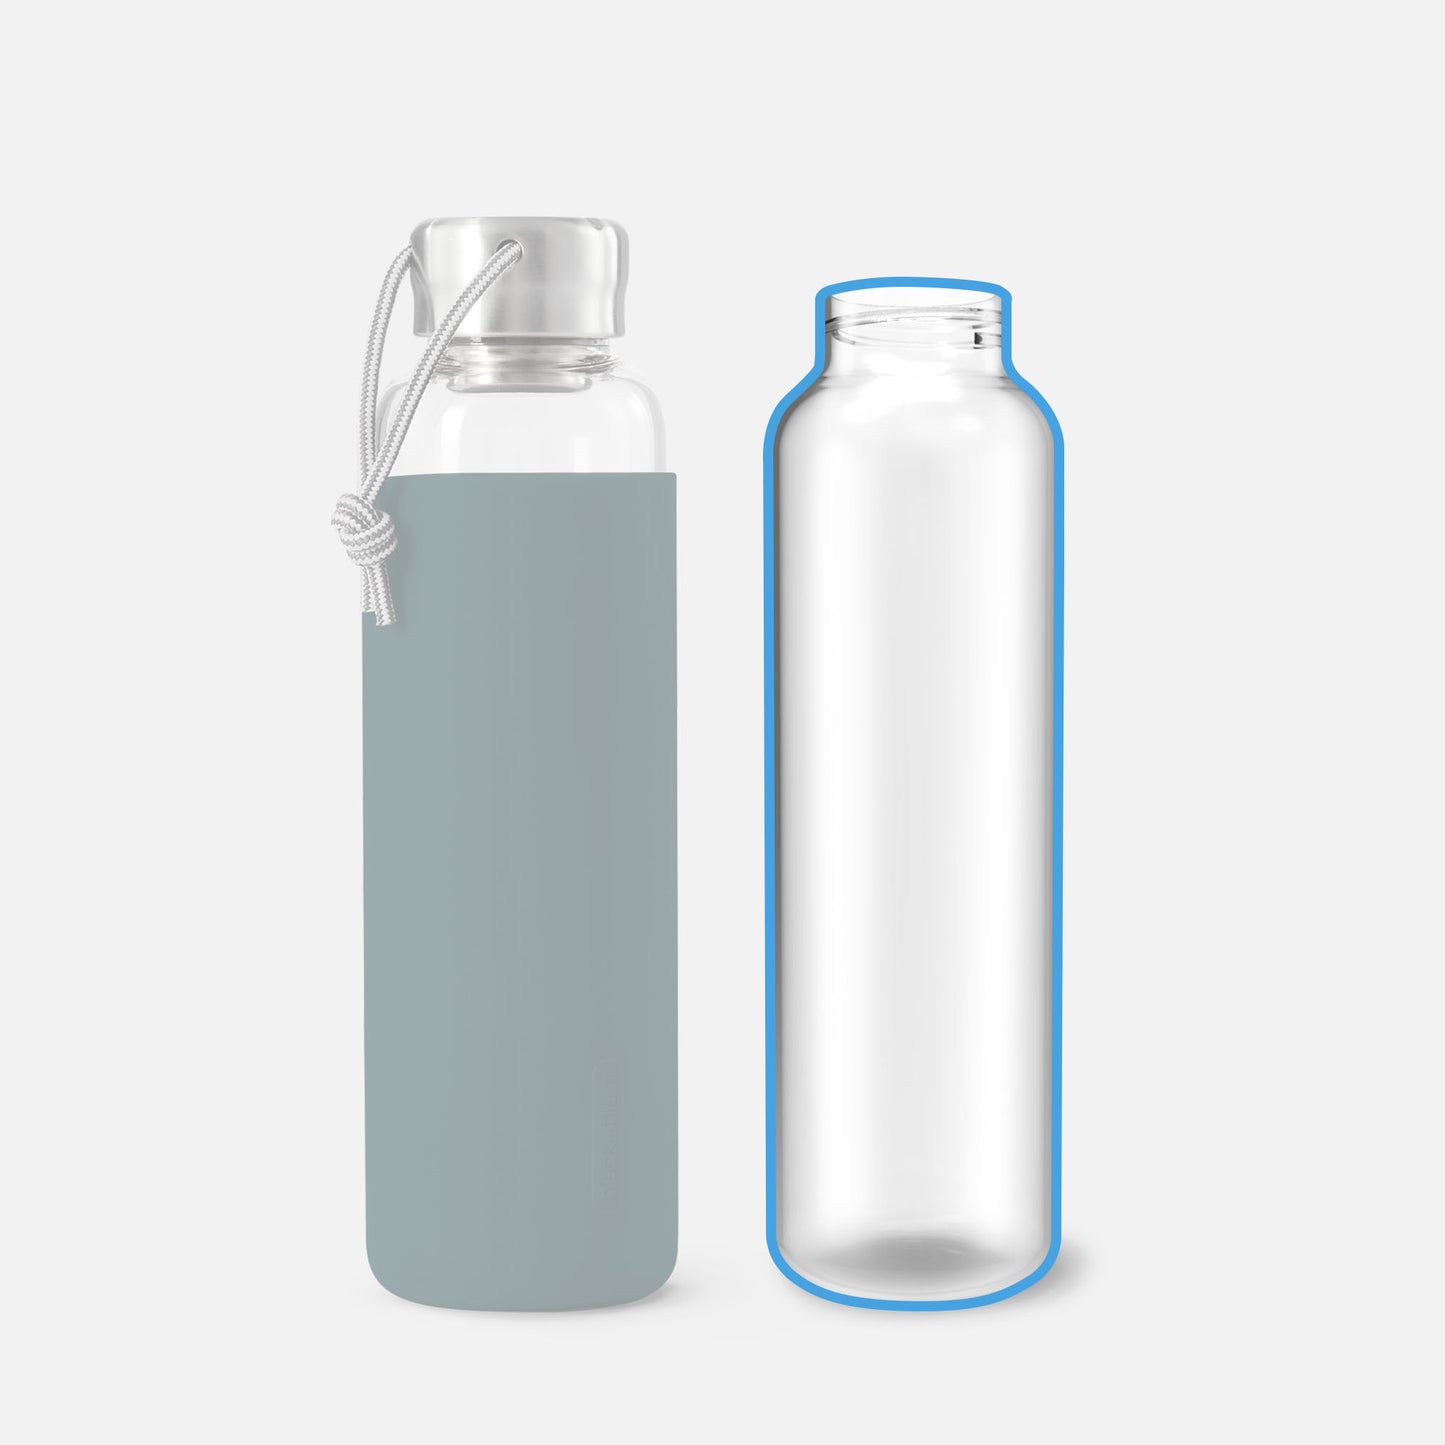 Replacement GLASS WATER BOTTLE - Glass